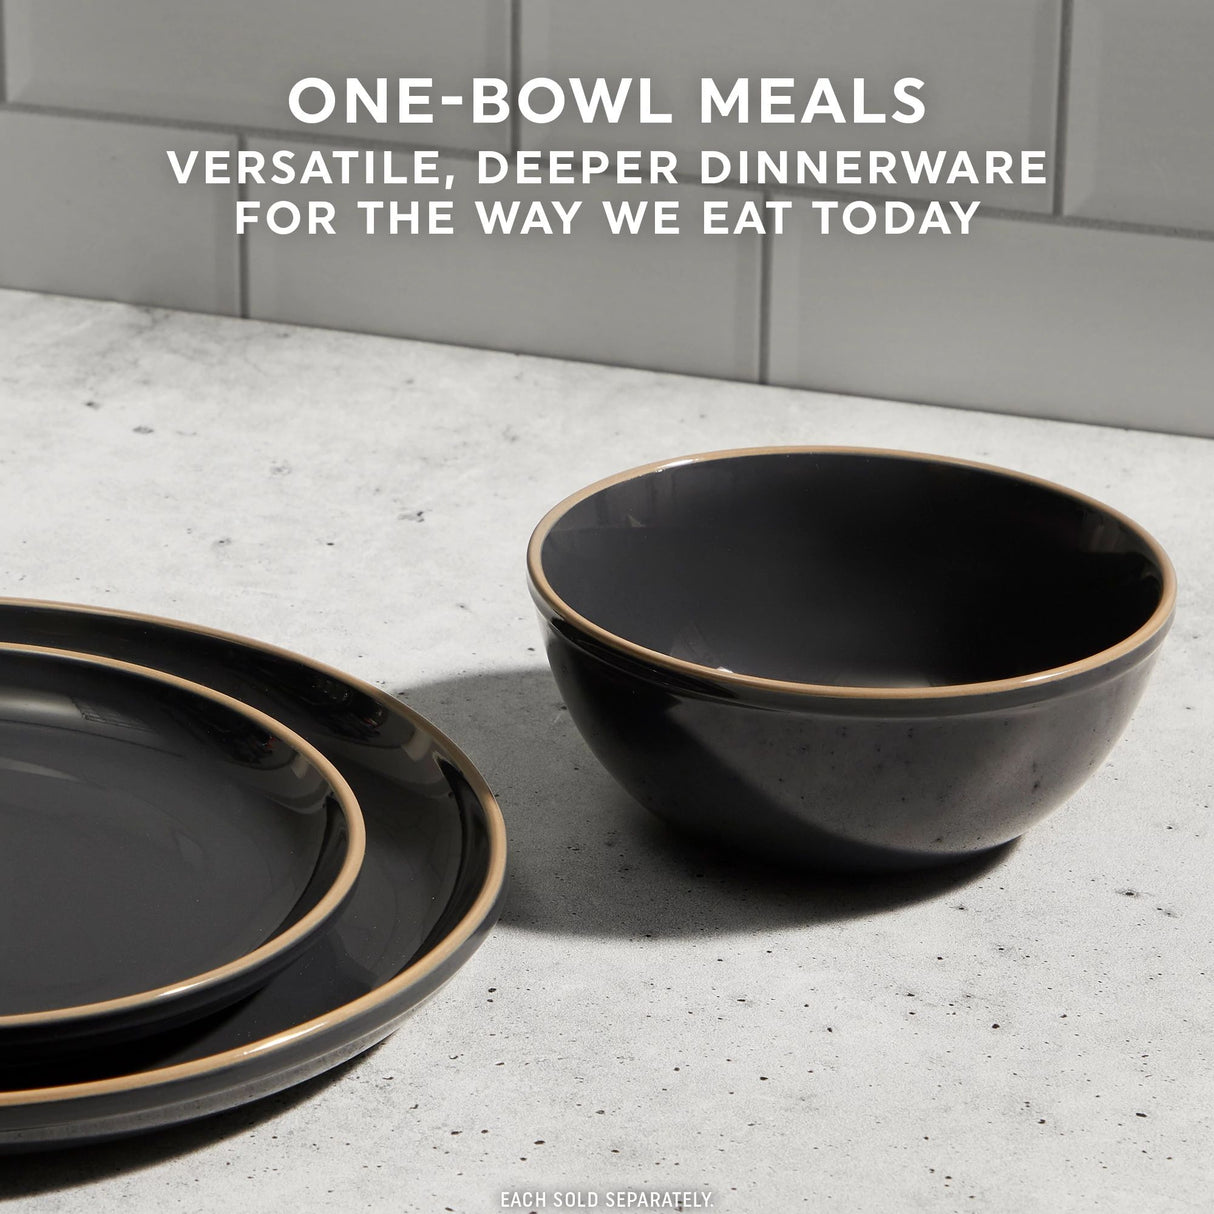  Stoneware Peppercorn dinnerware pieces with text one-bowl meals versatile deeper dinnerware for the way we eat today